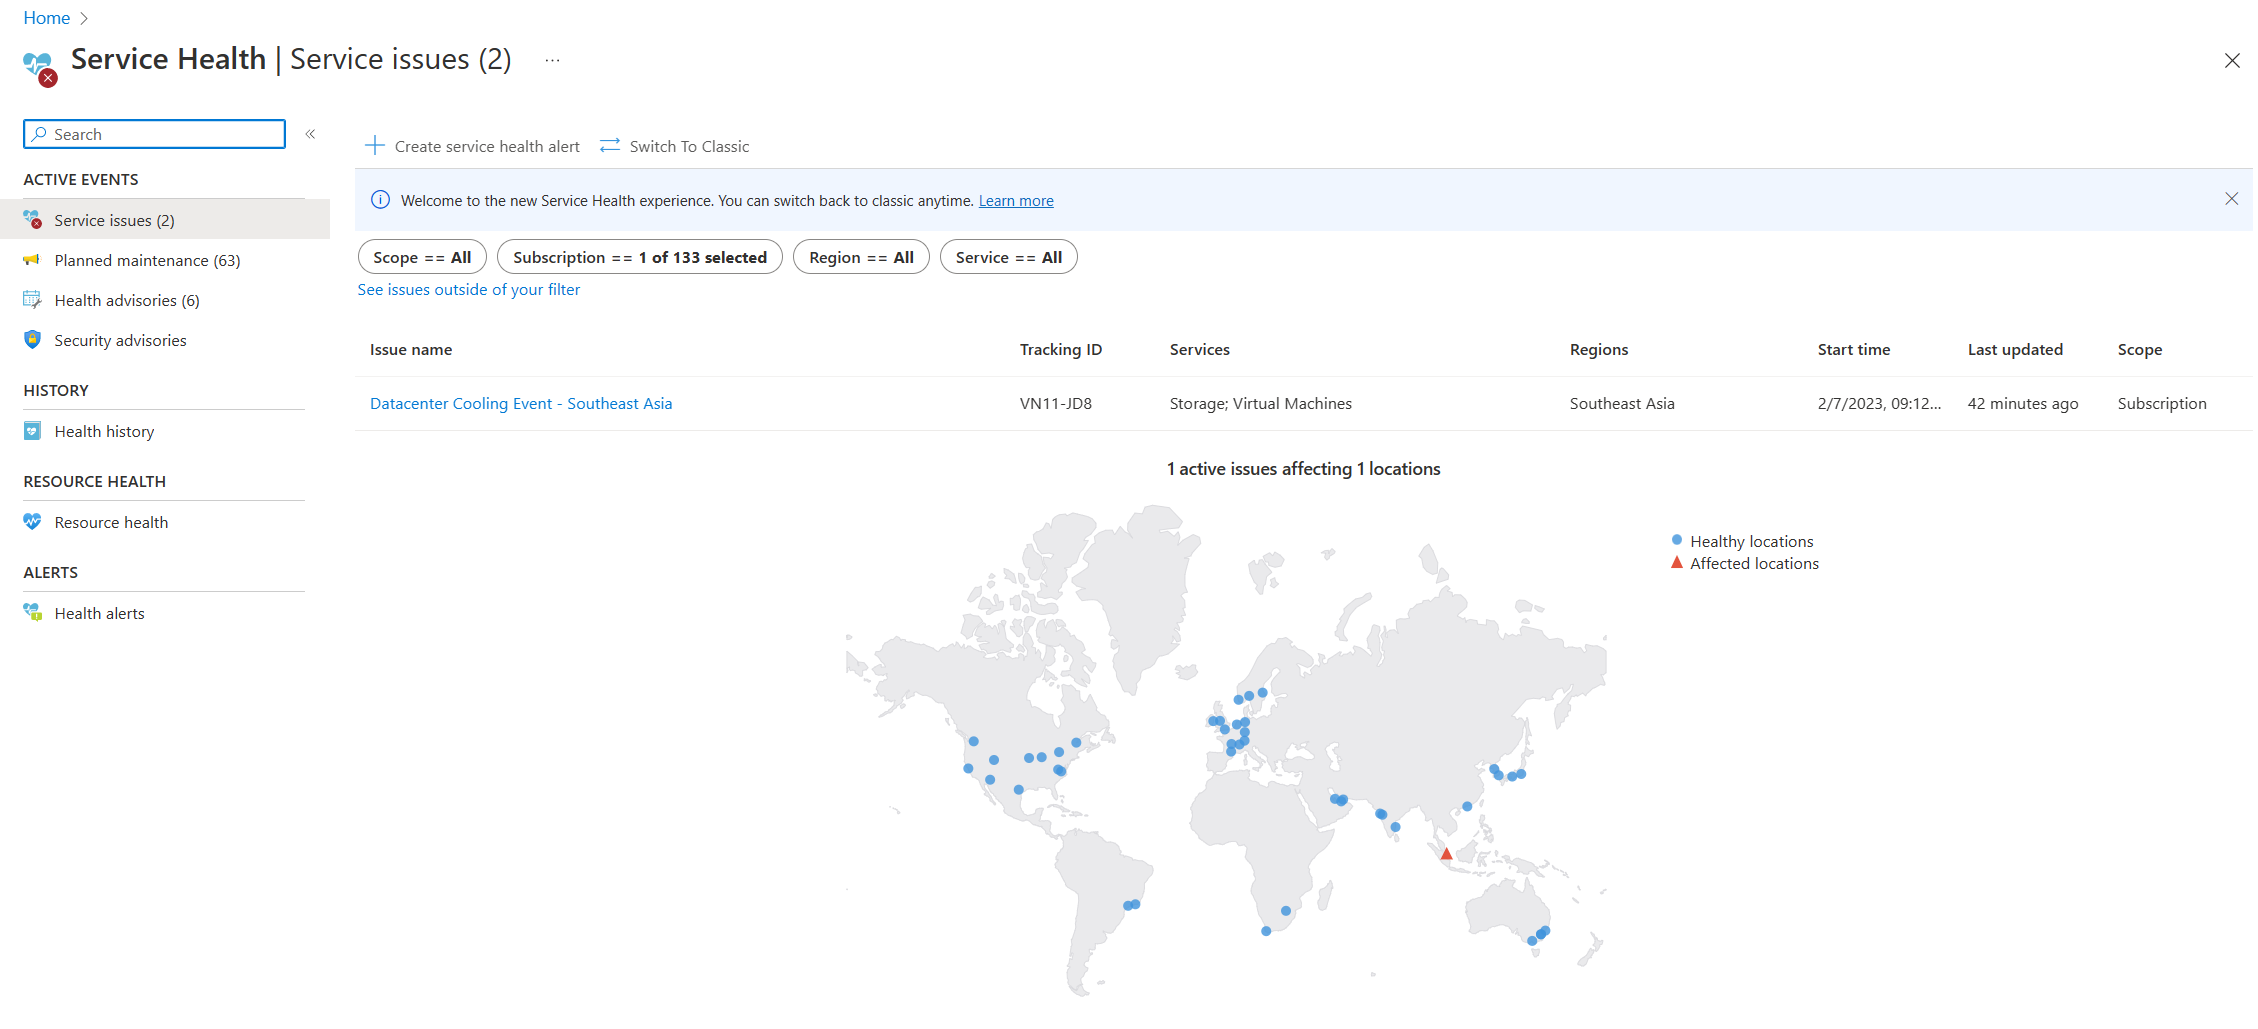 A screenshot of the Azure portal Service Health page during a service issue in Southeast Asia, showing the Issue and a map of affected resources.